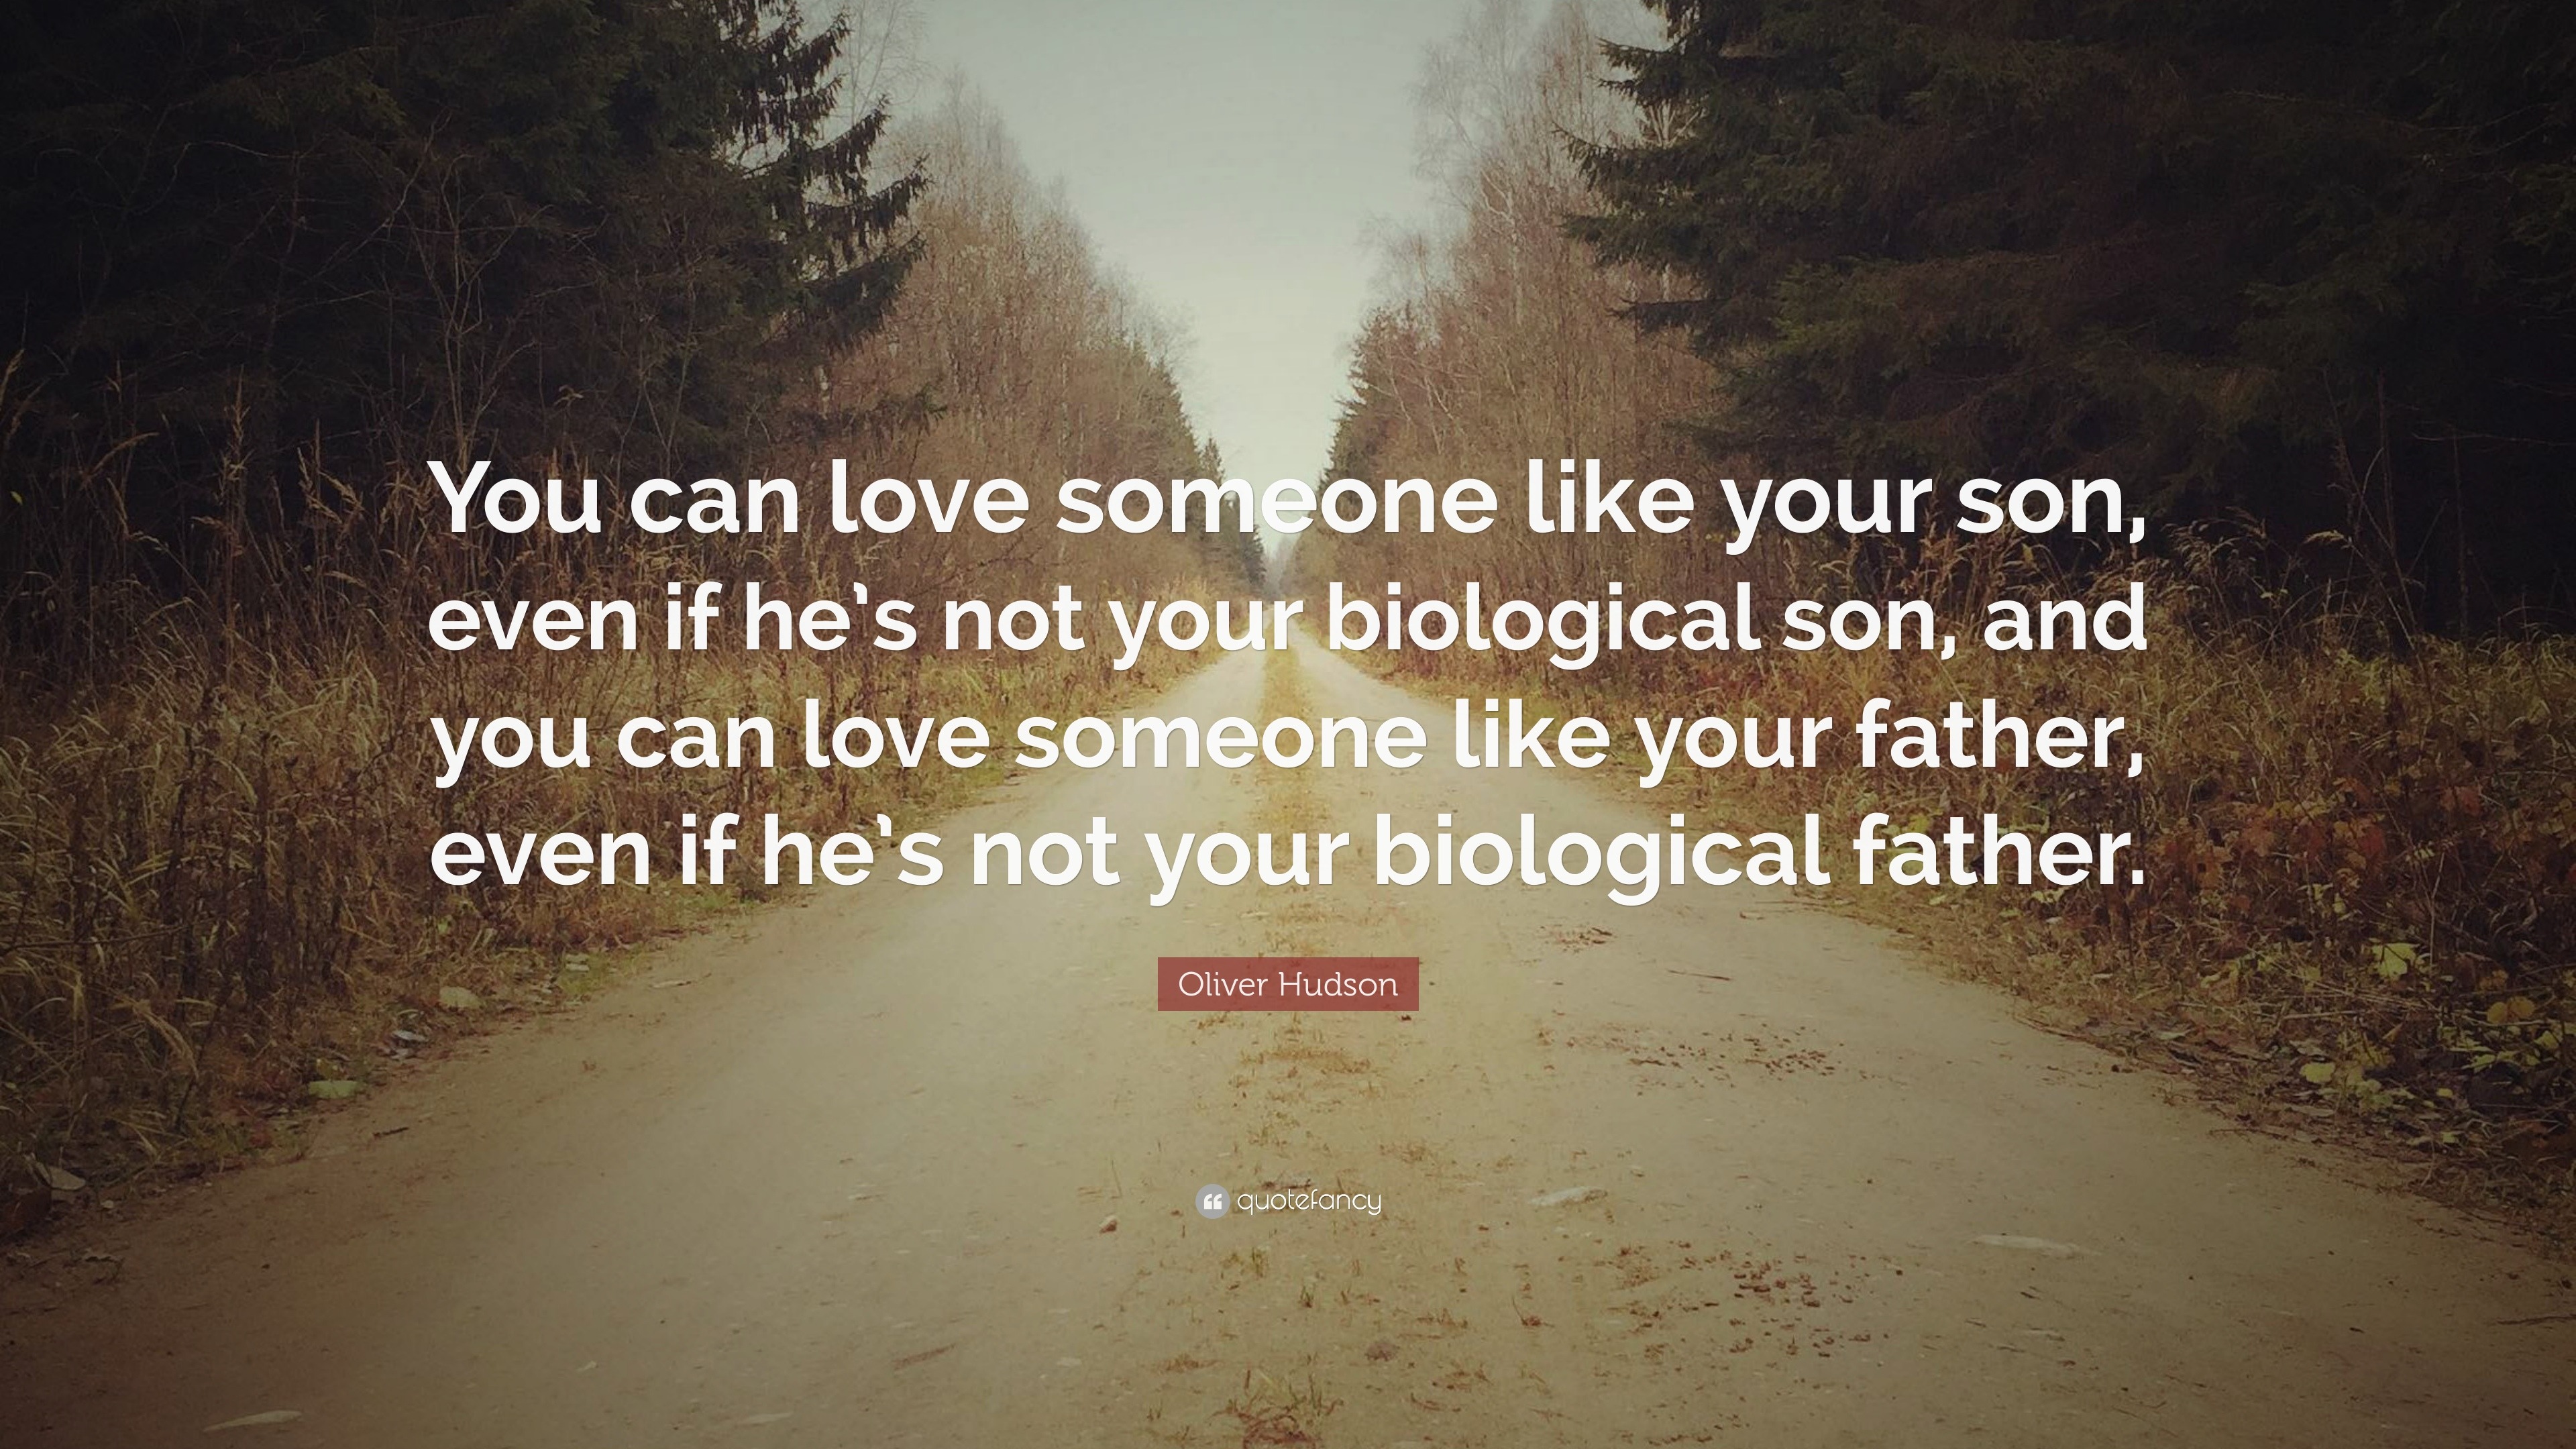 Oliver Hudson Quote: “You can love someone like your son, even if he’s ...